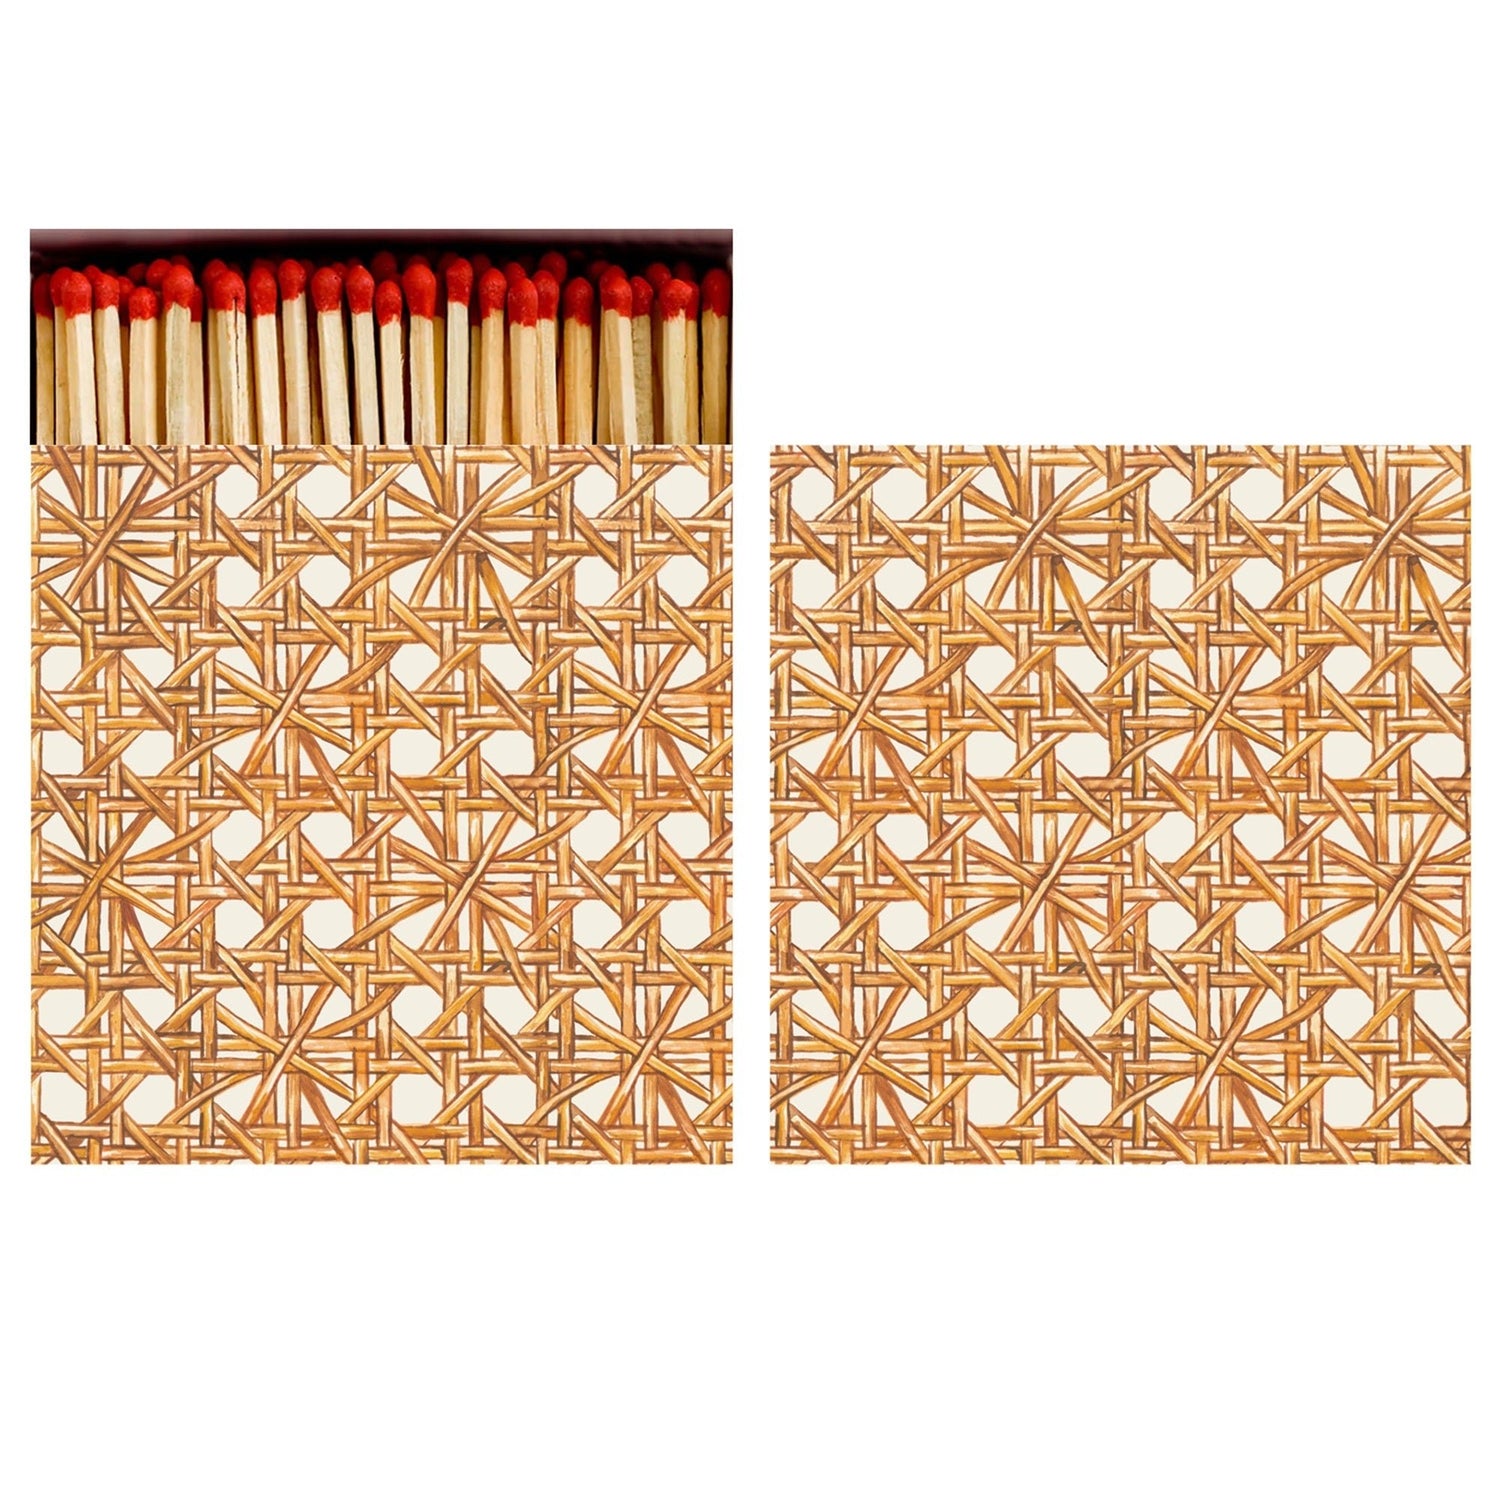 Rattan Weave Matches Box of 60 - Hester & Cook - Gaines Jewelers